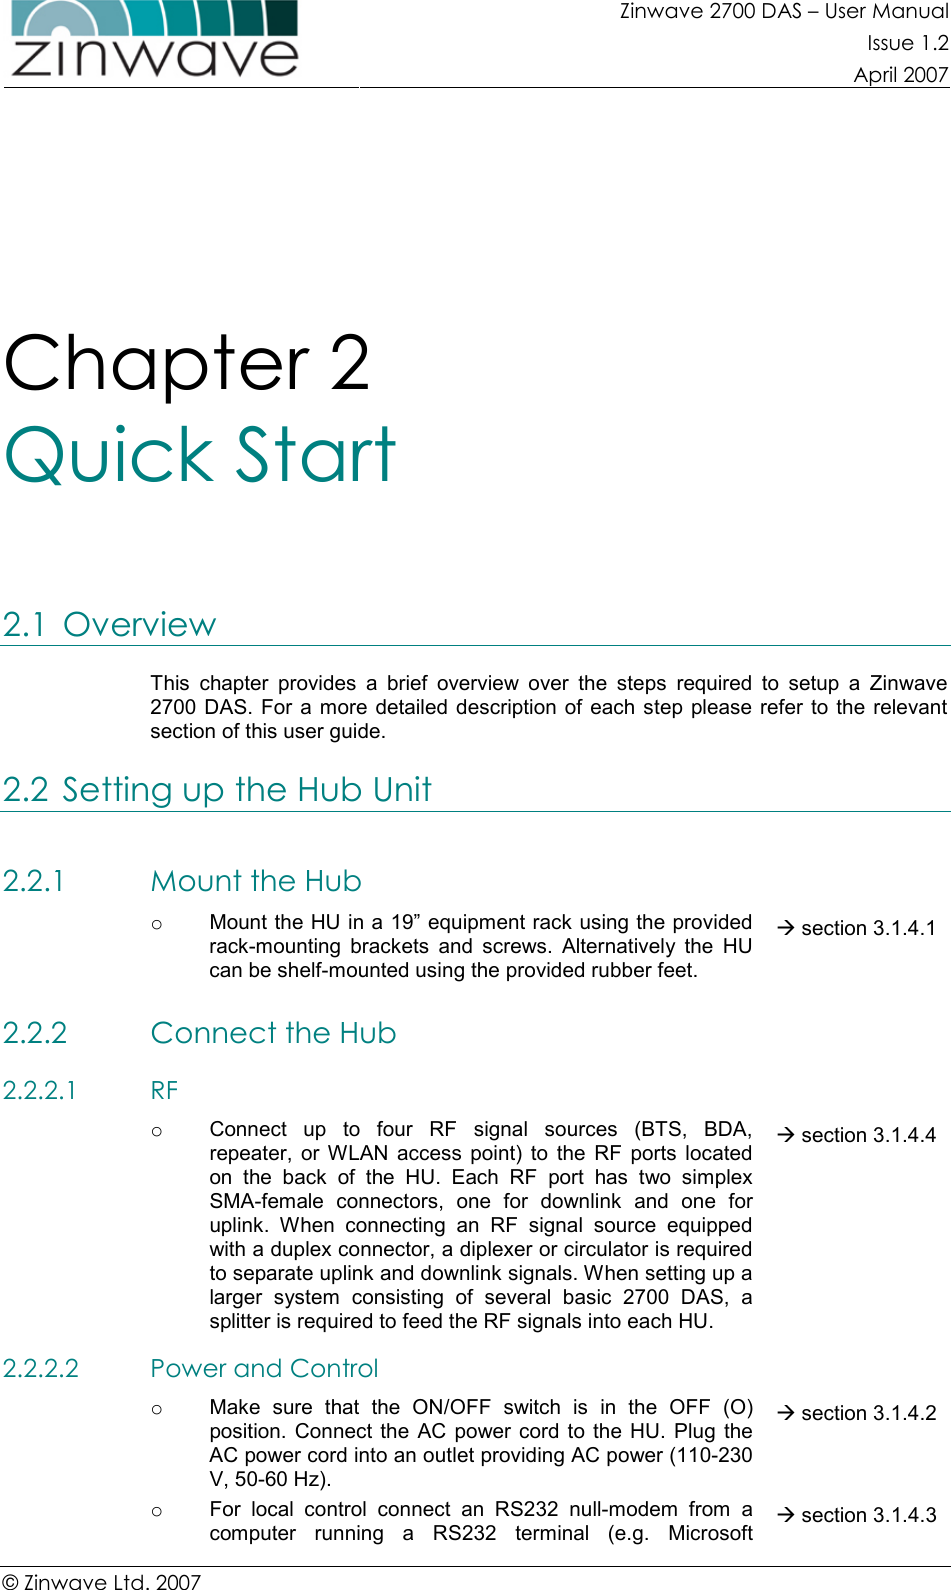 Zinwave 2700 DAS – User Manual Issue 1.2  April 2007  © Zinwave Ltd. 2007  Chapter 2  Quick Start 2.1 Overview This  chapter  provides  a  brief  overview  over  the  steps  required  to  setup  a  Zinwave 2700 DAS.  For  a more  detailed  description of  each step please  refer  to  the relevant section of this user guide. 2.2 Setting up the Hub Unit 2.2.1 Mount the Hub  o  Mount the HU in a 19” equipment rack using the provided rack-mounting  brackets  and  screws.  Alternatively  the  HU can be shelf-mounted using the provided rubber feet.  section 3.1.4.1 2.2.2 Connect the Hub  2.2.2.1 RF  o  Connect  up  to  four  RF  signal  sources  (BTS,  BDA, repeater,  or  WLAN  access  point)  to  the  RF  ports  located on  the  back  of  the  HU.  Each  RF  port  has  two  simplex SMA-female  connectors,  one  for  downlink  and  one  for uplink.  When  connecting  an  RF  signal  source  equipped with a duplex connector, a diplexer or circulator is required to separate uplink and downlink signals. When setting up a larger  system  consisting  of  several  basic  2700  DAS,  a splitter is required to feed the RF signals into each HU.  section 3.1.4.4 2.2.2.2 Power and Control  o  Make  sure  that  the  ON/OFF  switch  is  in  the  OFF  (O) position.  Connect the  AC power cord  to the  HU.  Plug the AC power cord into an outlet providing AC power (110-230 V, 50-60 Hz).  section 3.1.4.2 o  For  local  control  connect  an  RS232  null-modem  from  a computer  running  a  RS232  terminal  (e.g.  Microsoft  section 3.1.4.3 